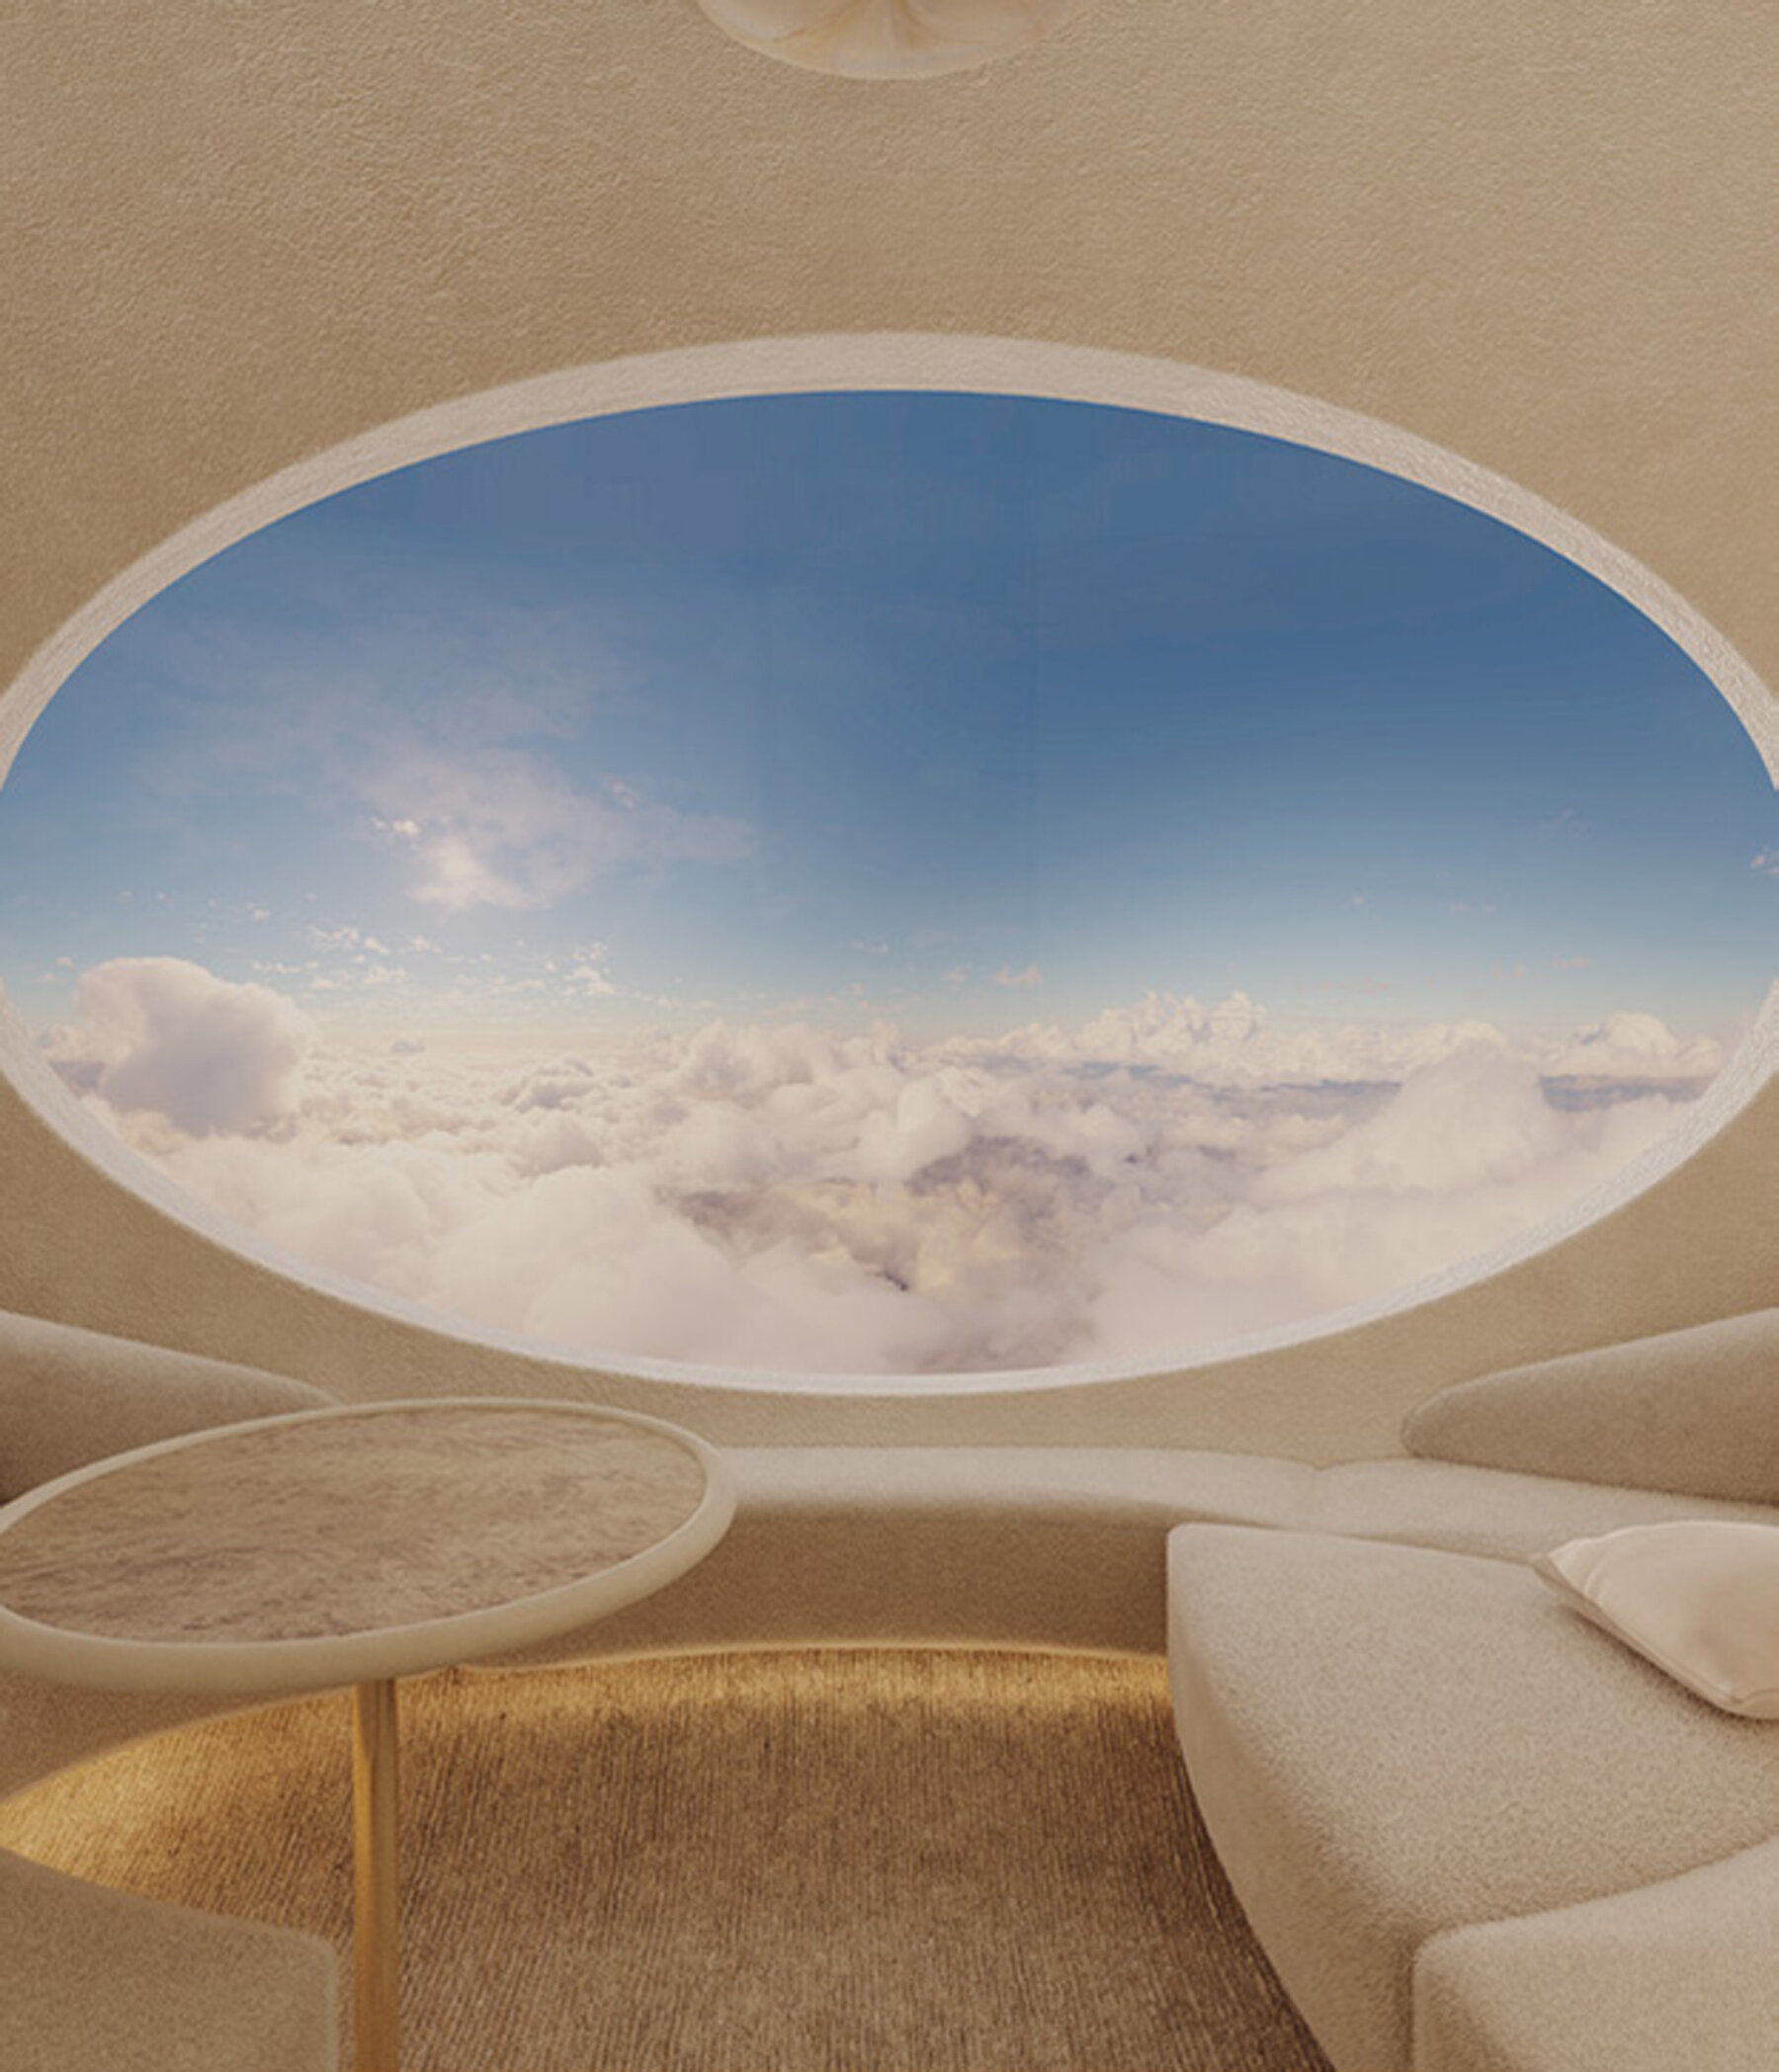 A rendering of the interior of a hot air balloon, with a tufted carpet, a circular table and a curved upholstered bench. An oval window looks onto the top of clouds.